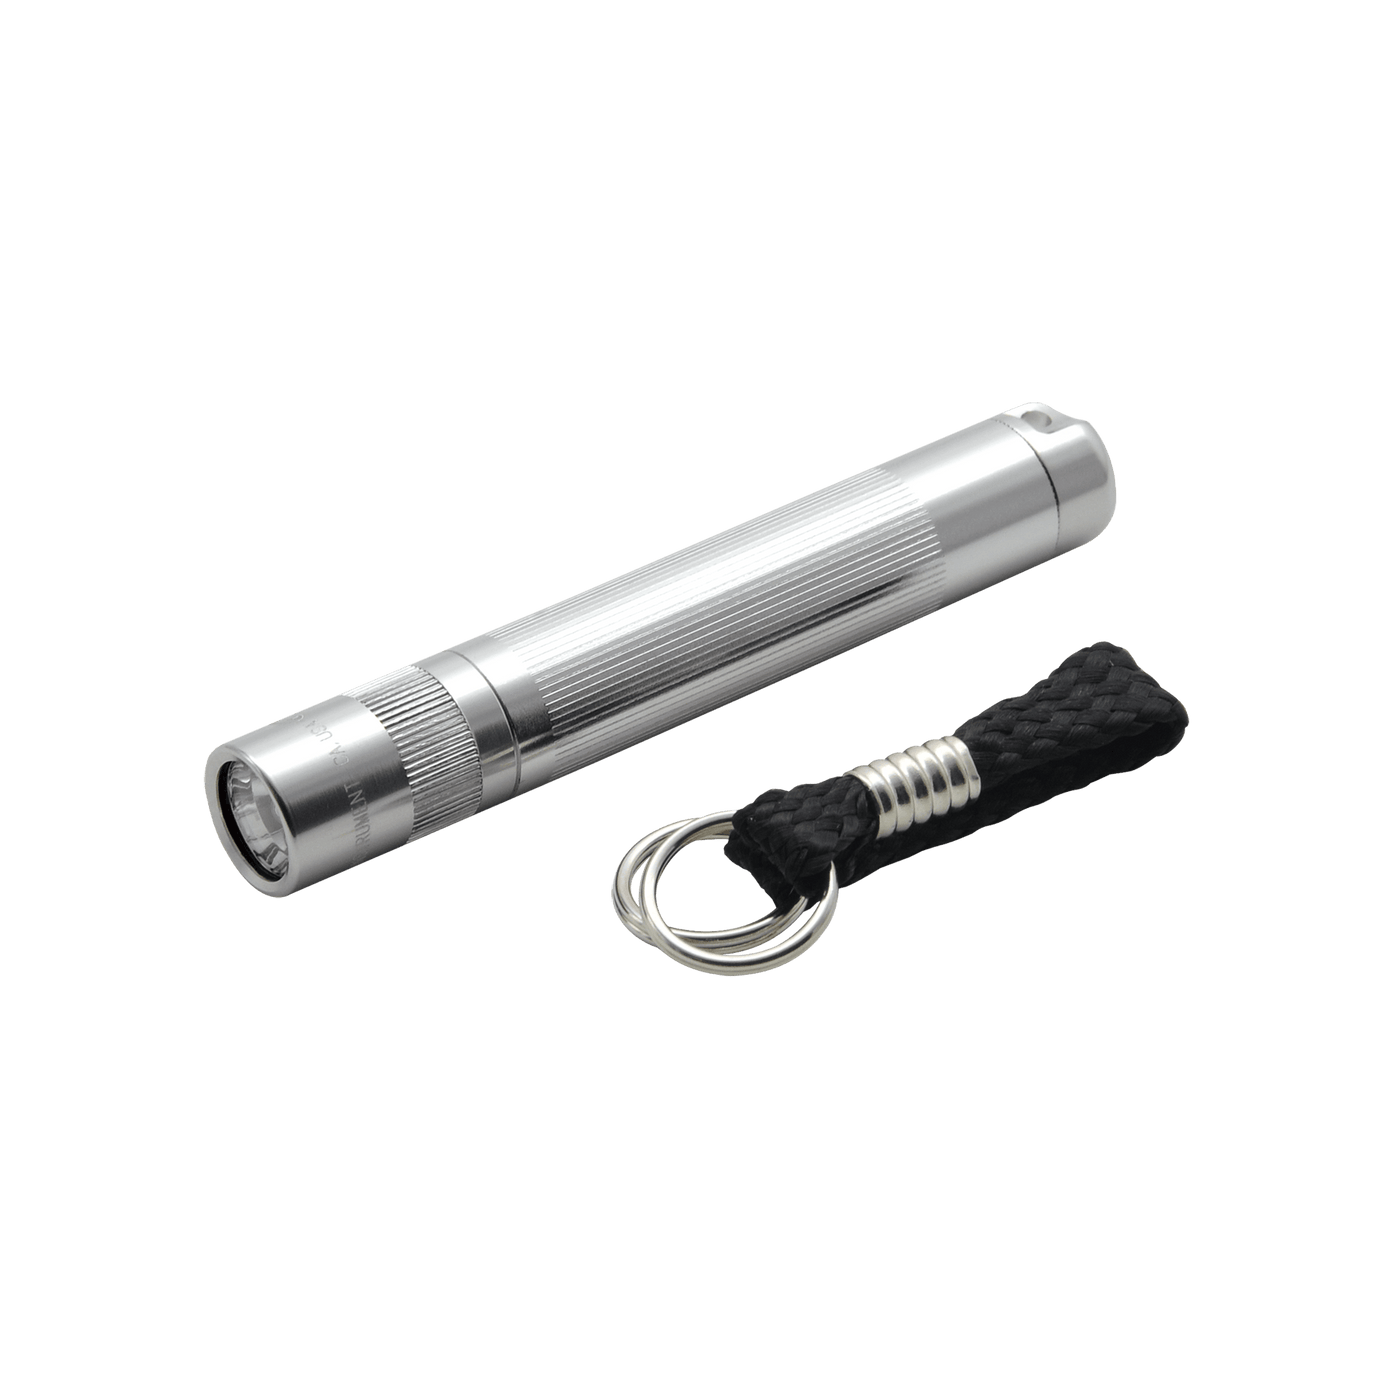 Maglite Solitaire LED Silver Keychain Flashlight